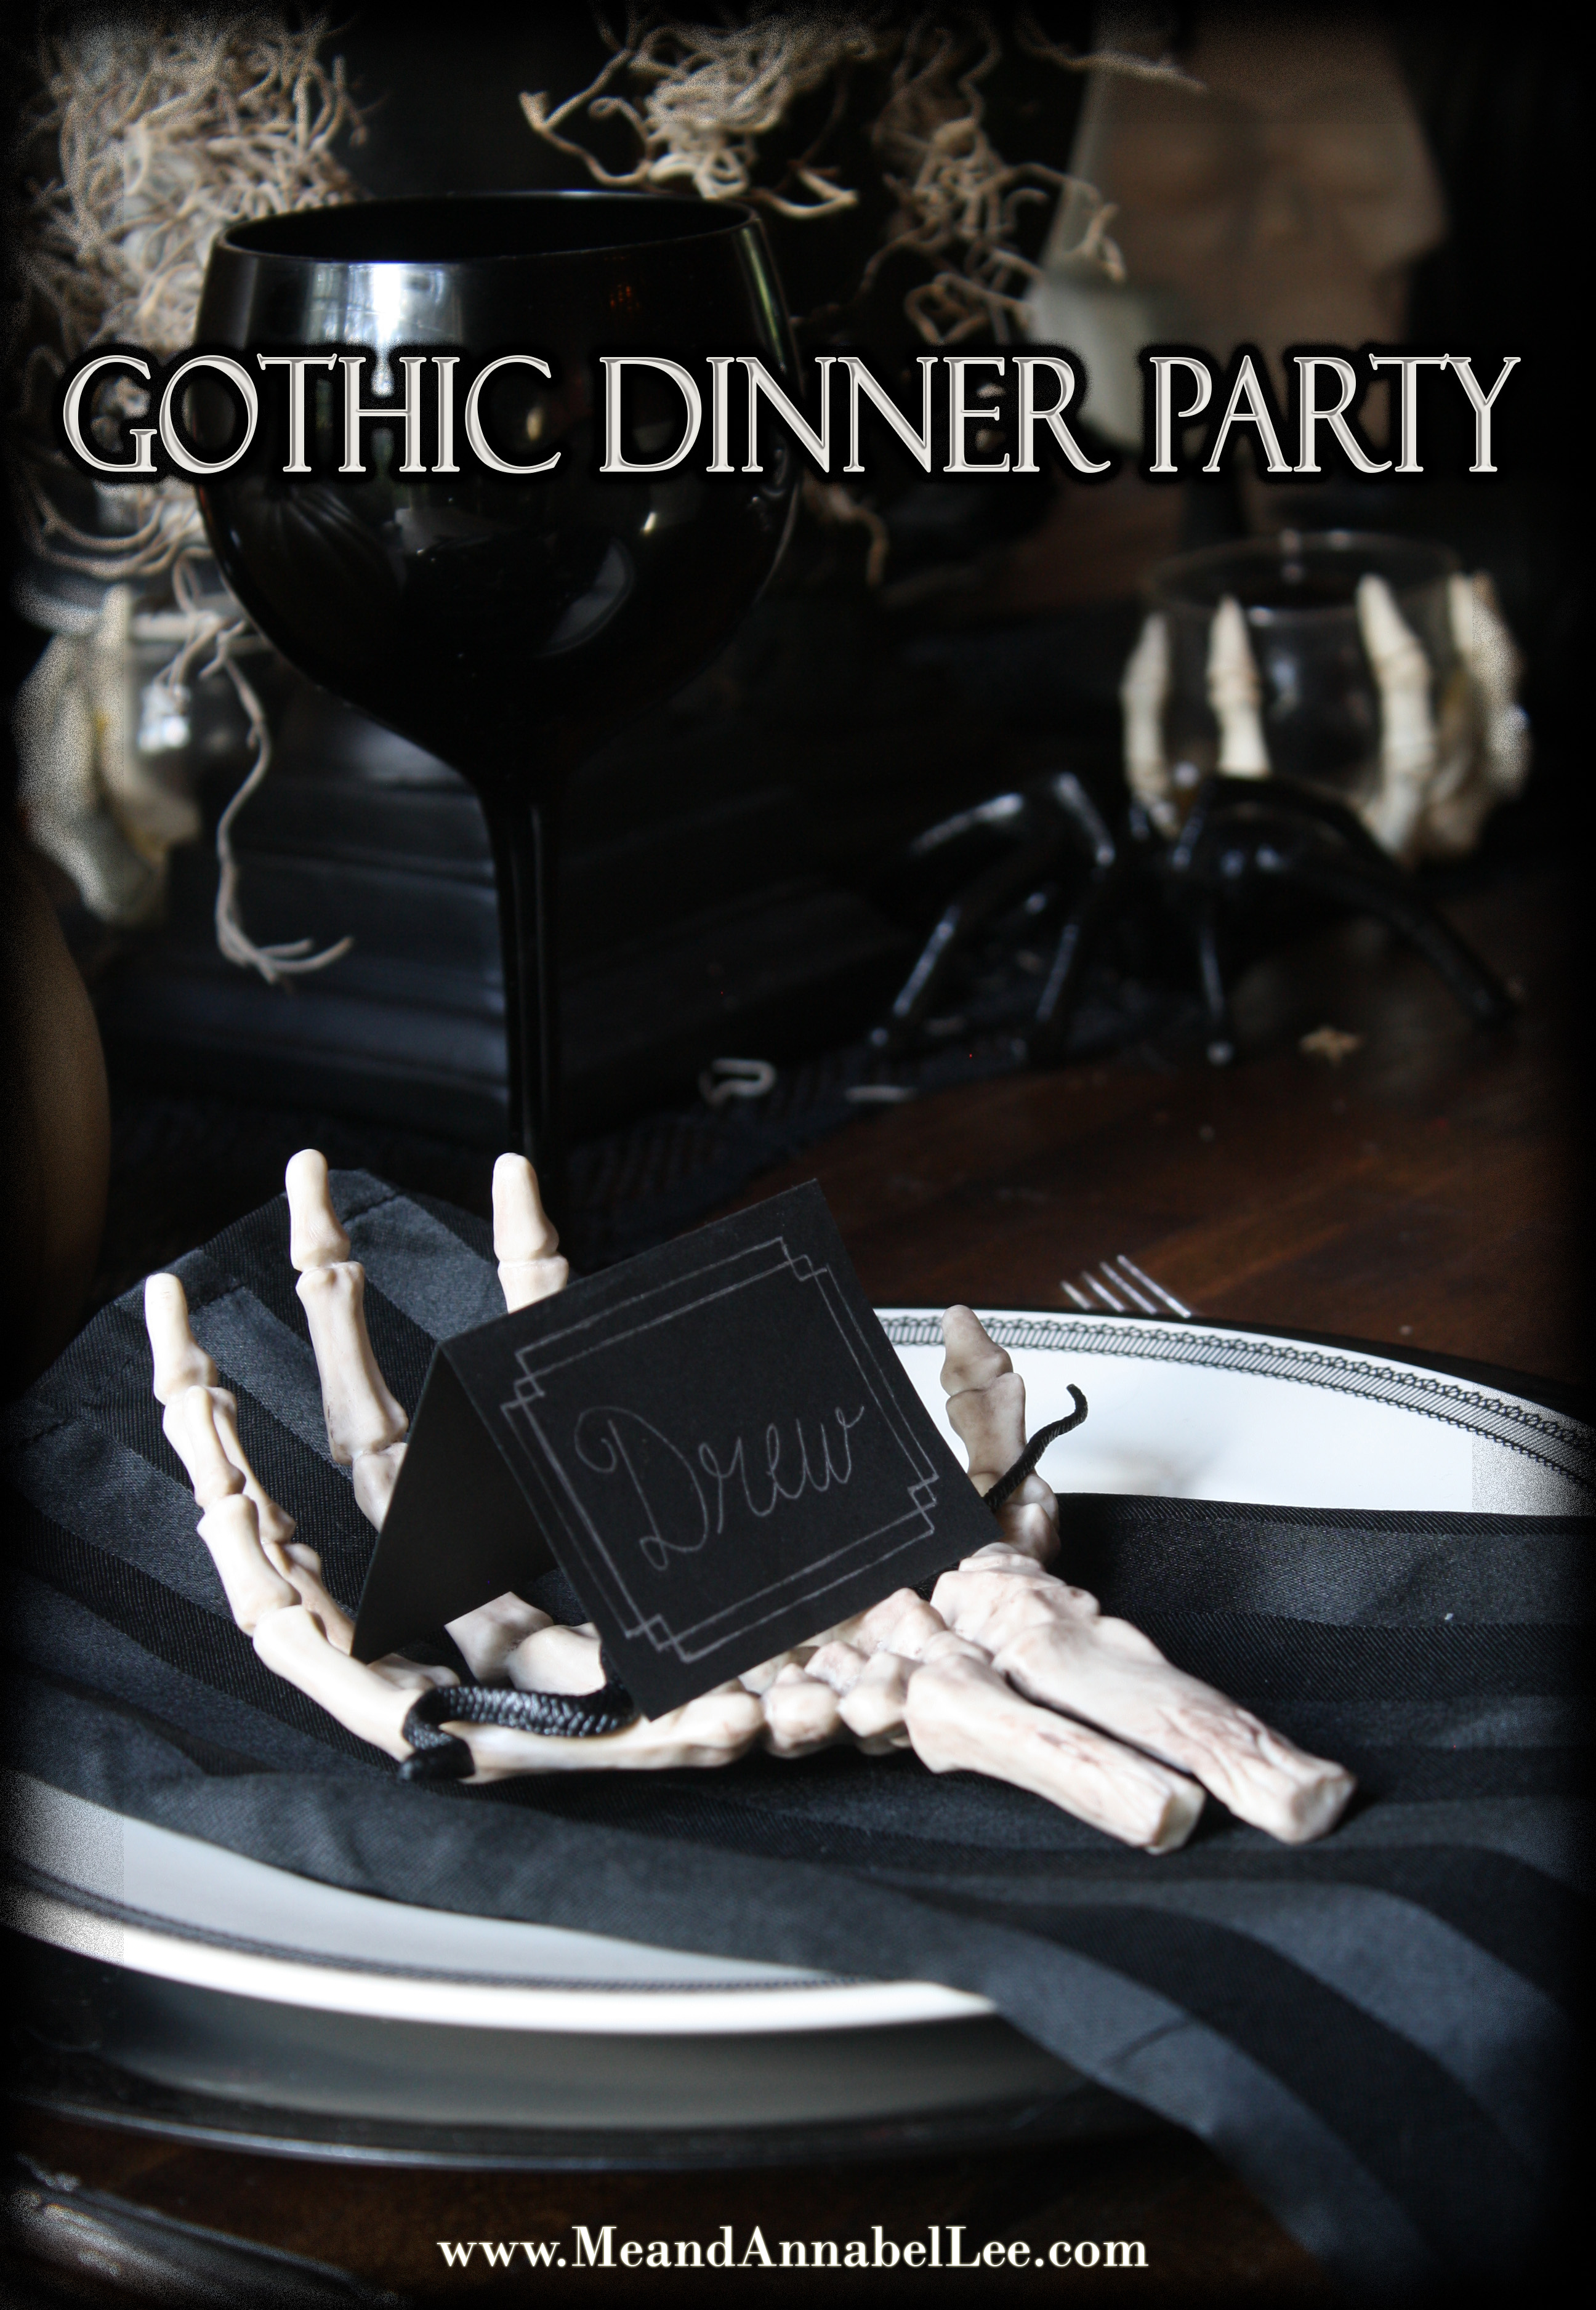 Gothic Dinner Party | Halloween Place Setting | Skeleton Seating Cards | www.MeandAnnabelLee.com